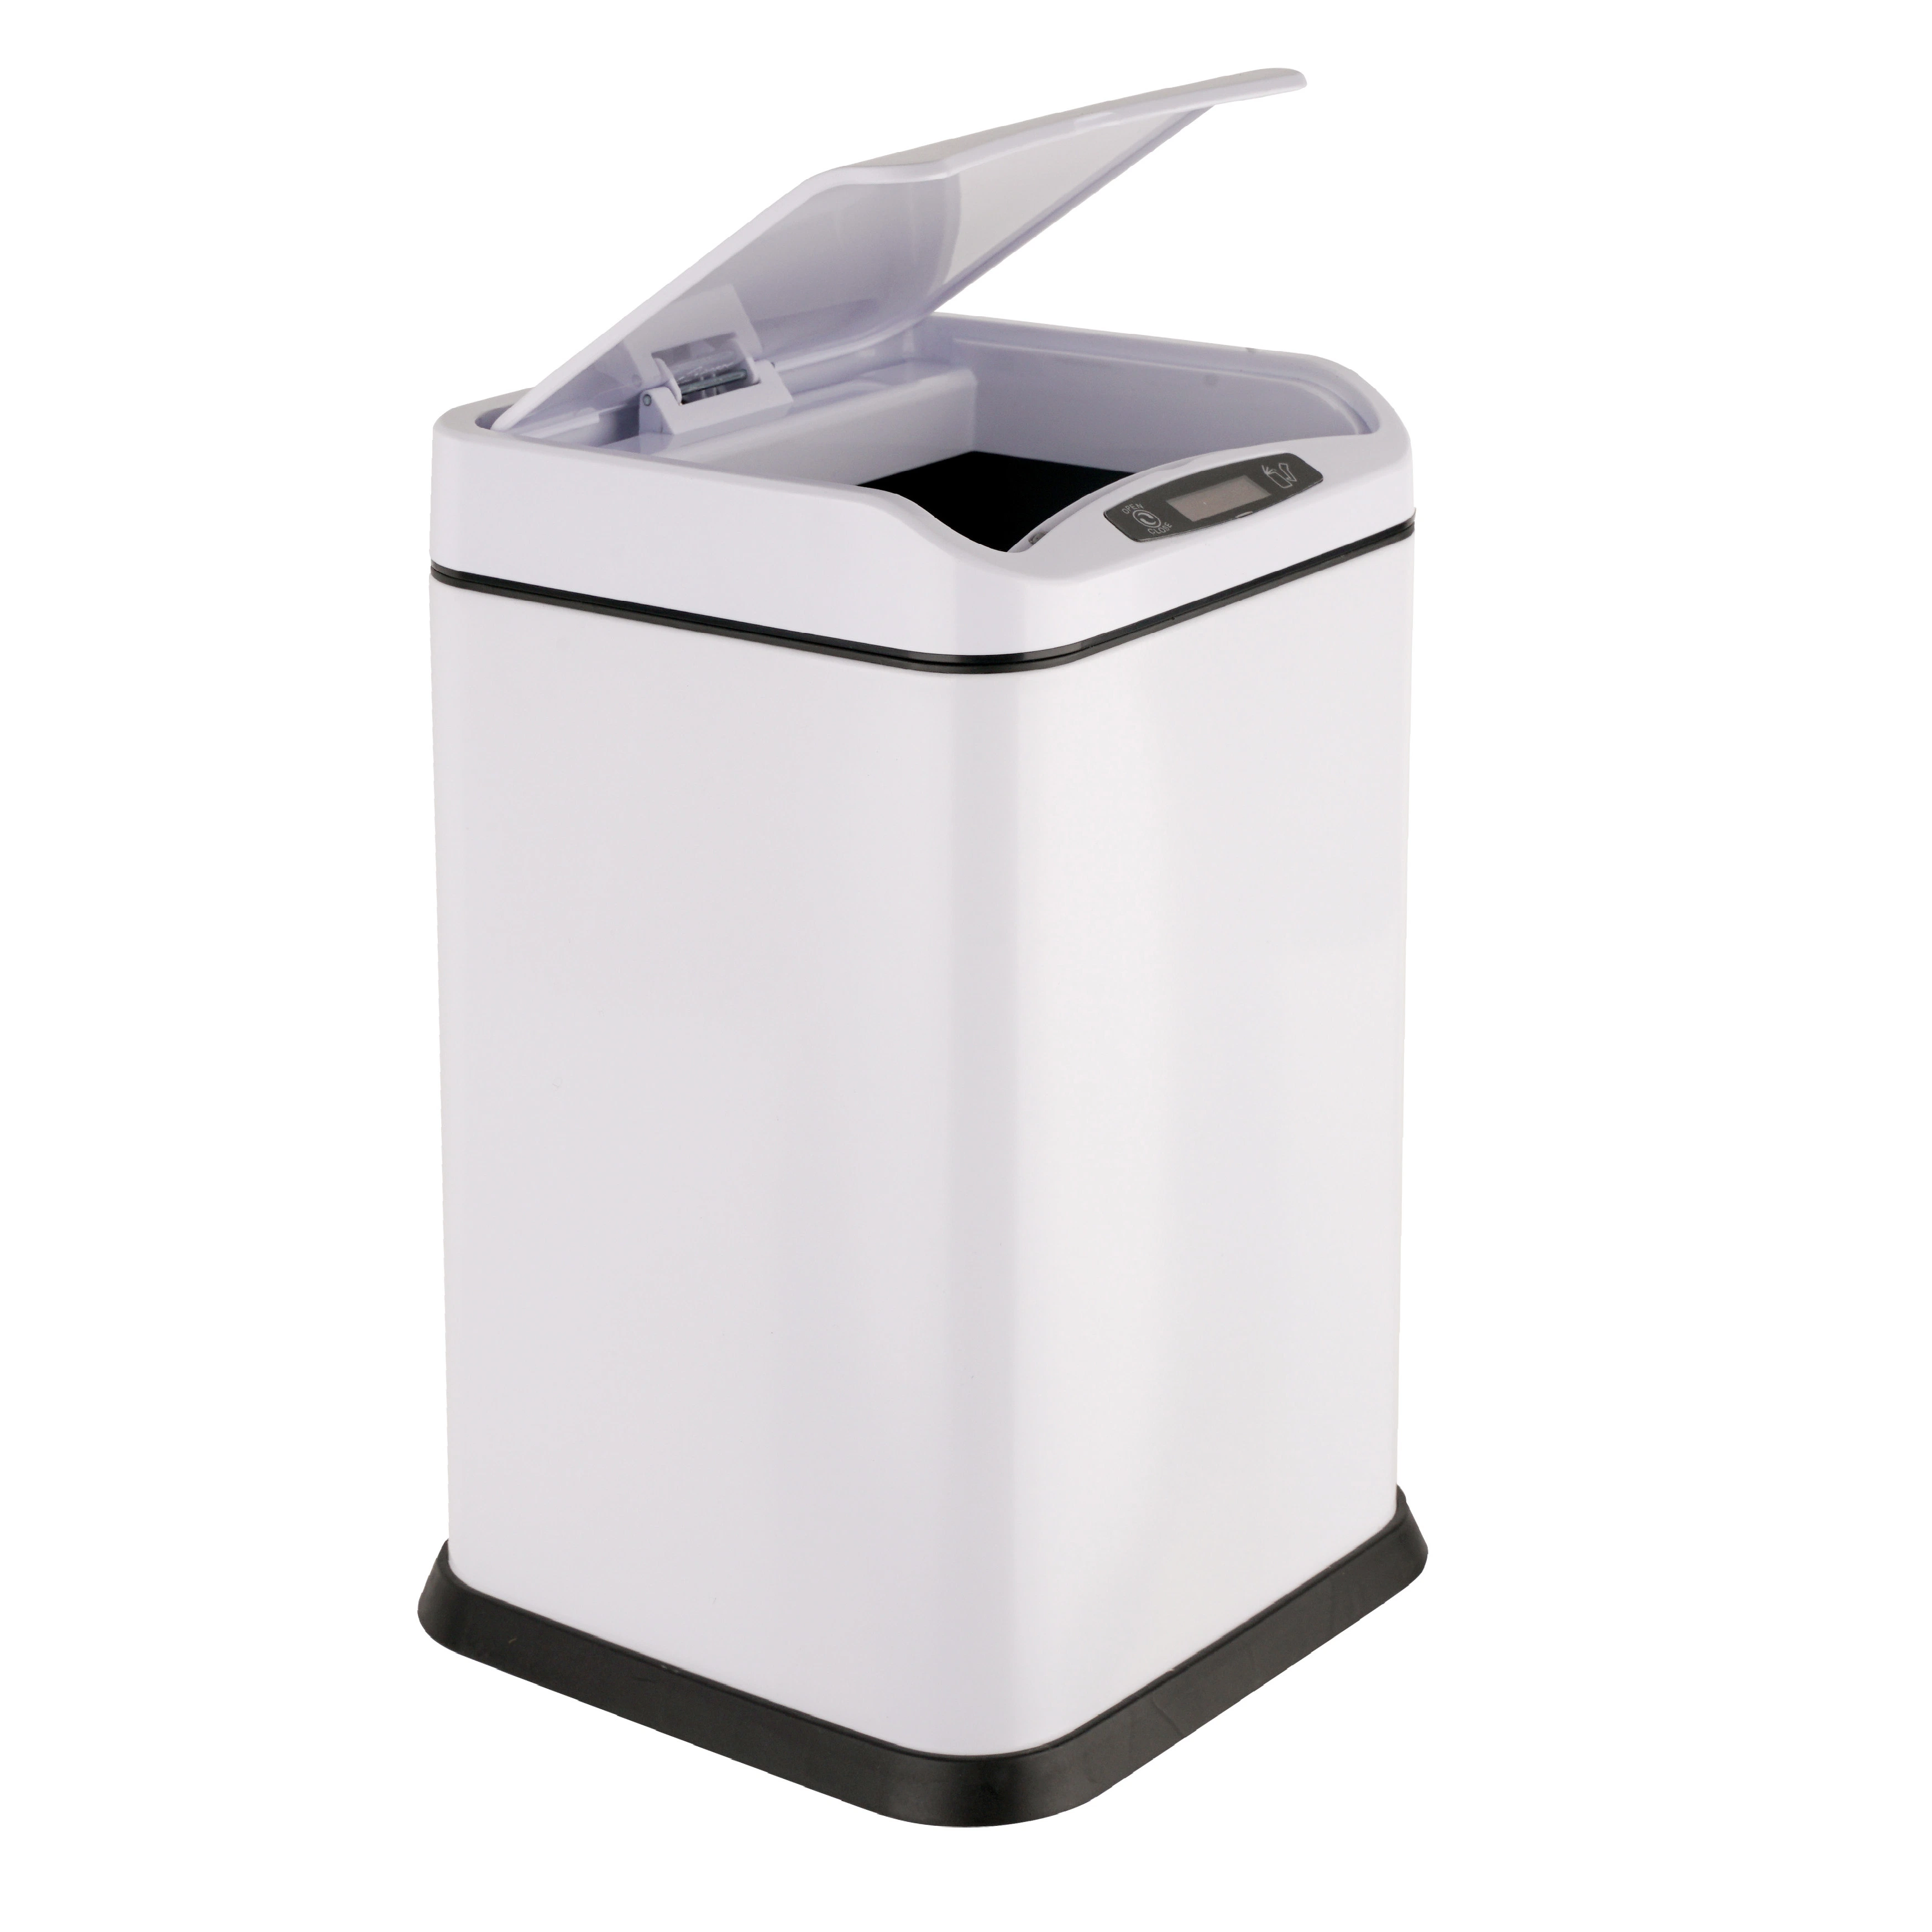 Accepted Automatic Induction, Silent Closed, Eco-Friendly Steel Dustbins Smart Large Sensor Dustbin Stainless